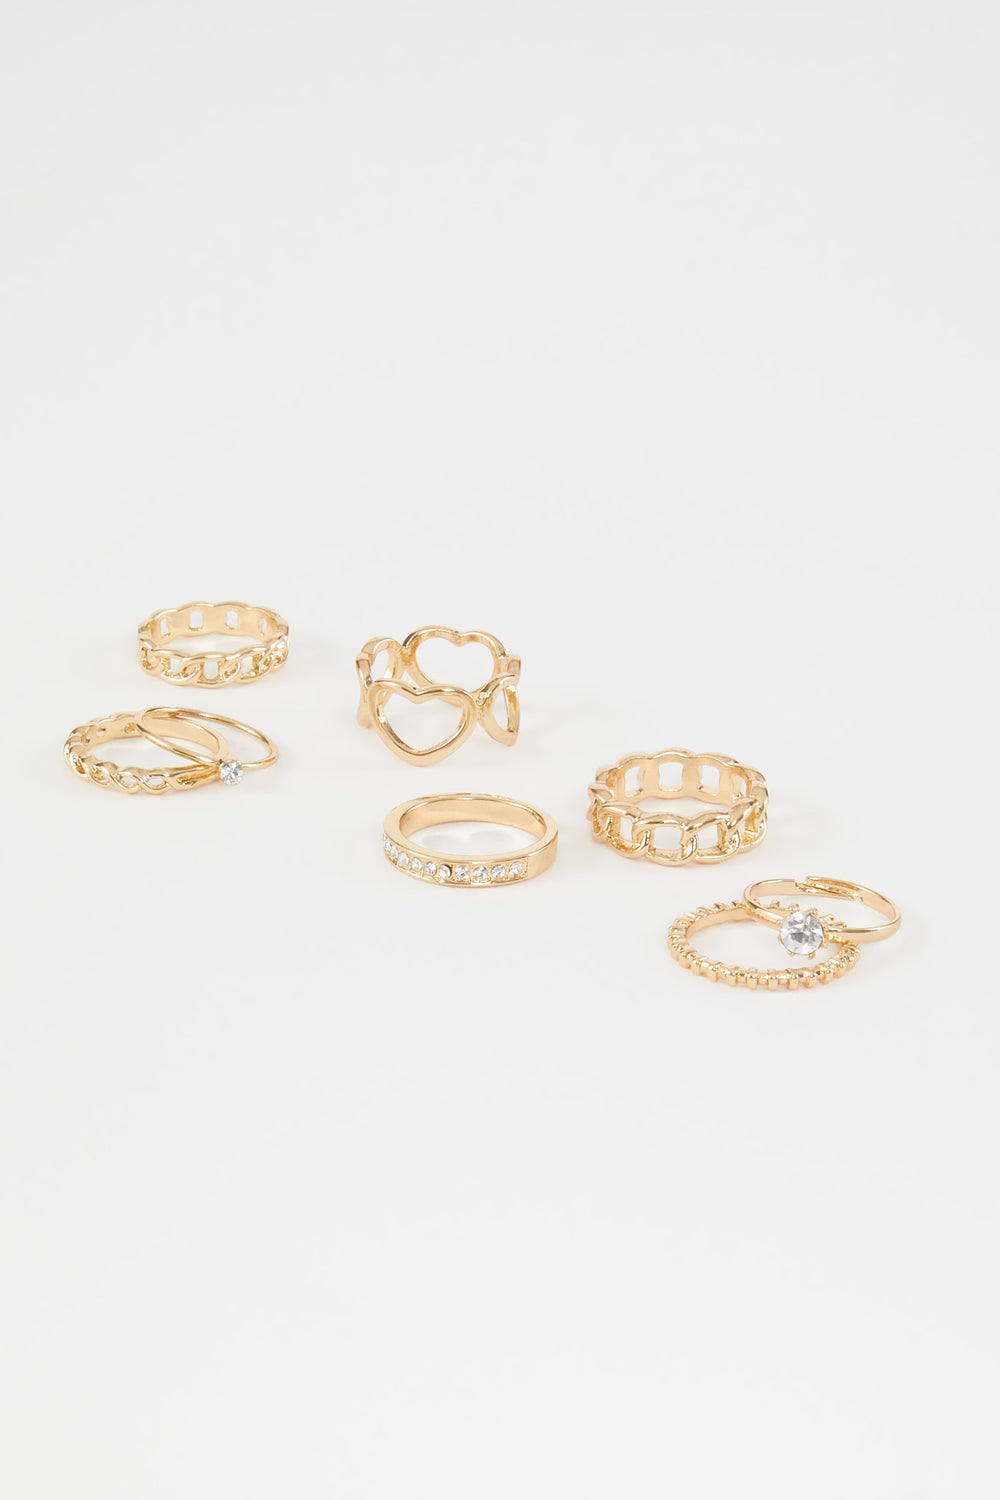 Assorted Faux Gem Rings Set Gold